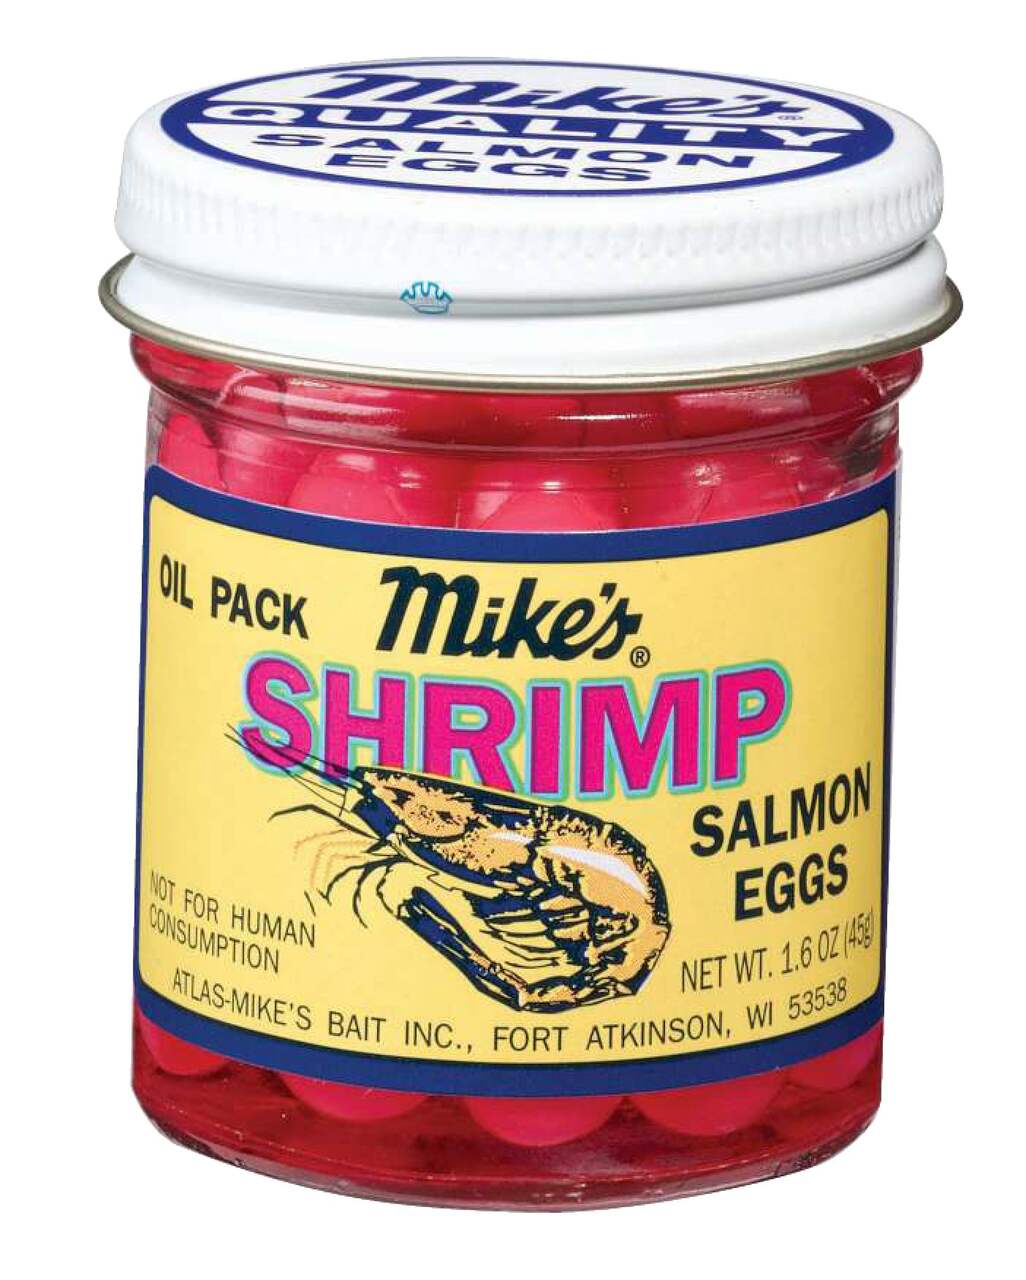 https://media-www.canadiantire.ca/product/playing/fishing/fishing-lures/0781427/atlas-mike-s-shrimp-eggs-fluorescent-pink-21f17ad8-7fd3-454f-880f-b08ec1e07337-jpgrendition.jpg?imdensity=1&imwidth=640&impolicy=mZoom